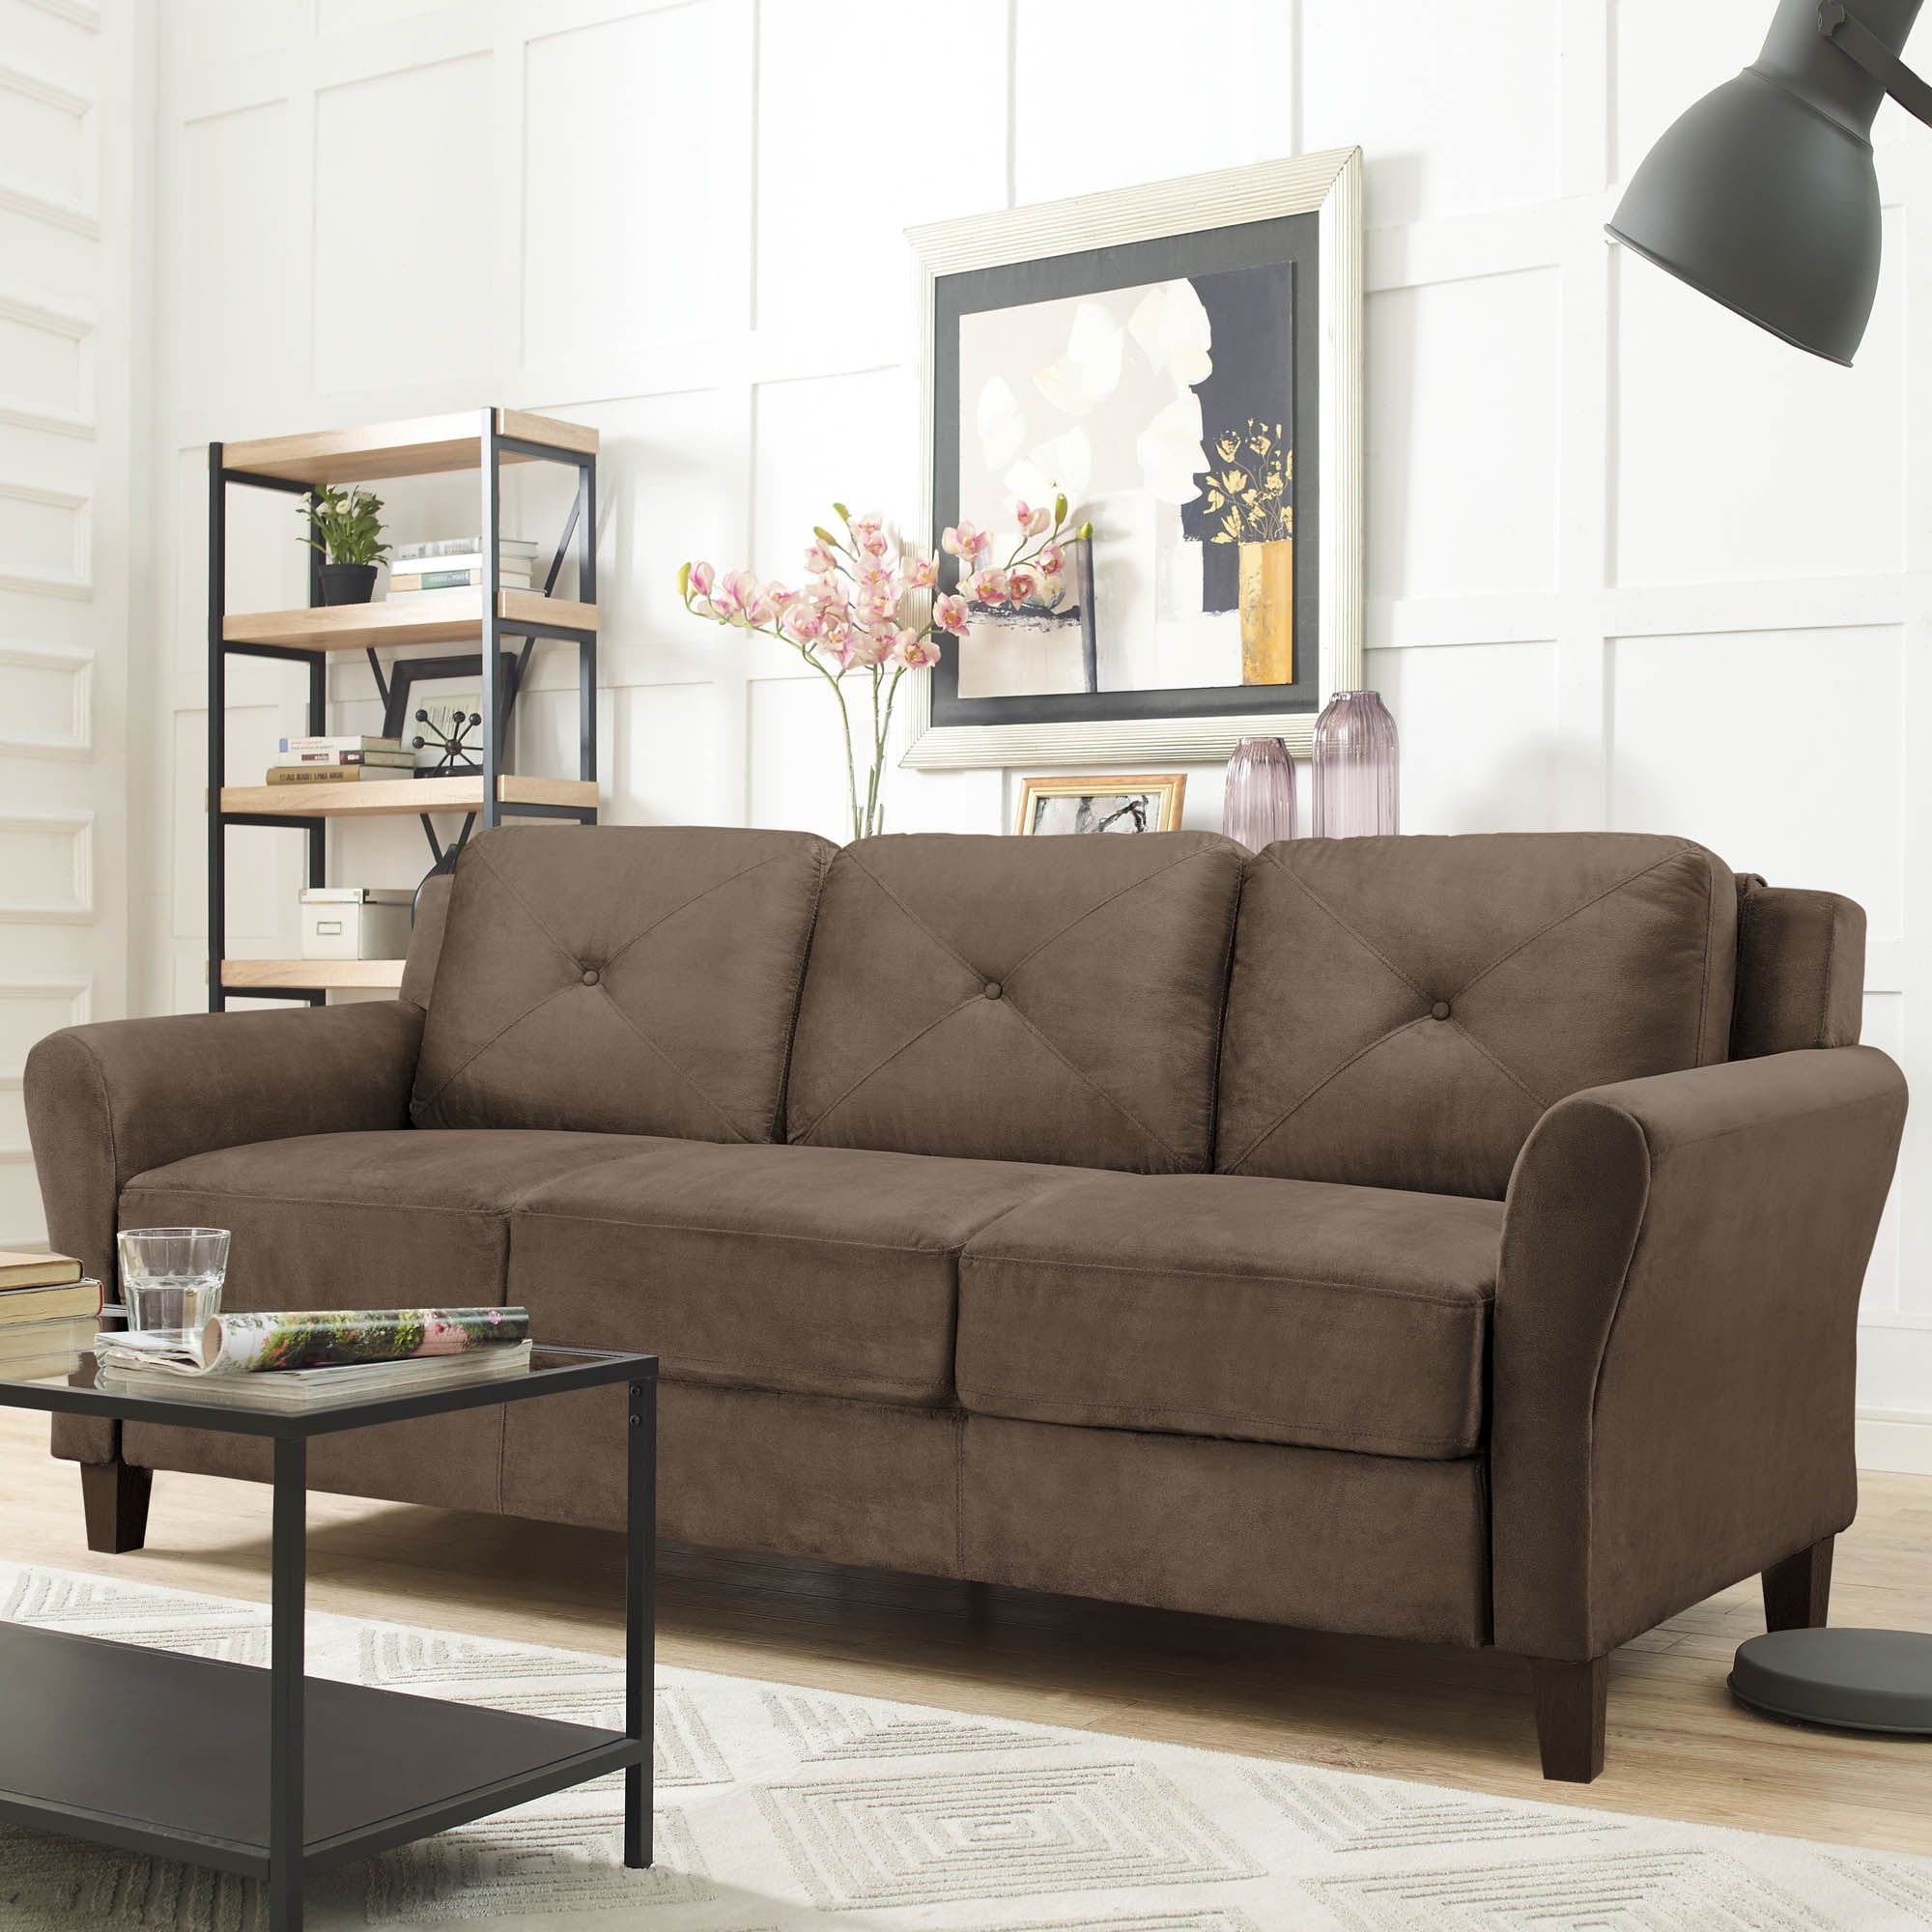 Lifestyle Solutions Taryn Sofa With Rolled Arms, Brown Fabric – Walmart With Sofas With Rolled Arm (Gallery 9 of 20)